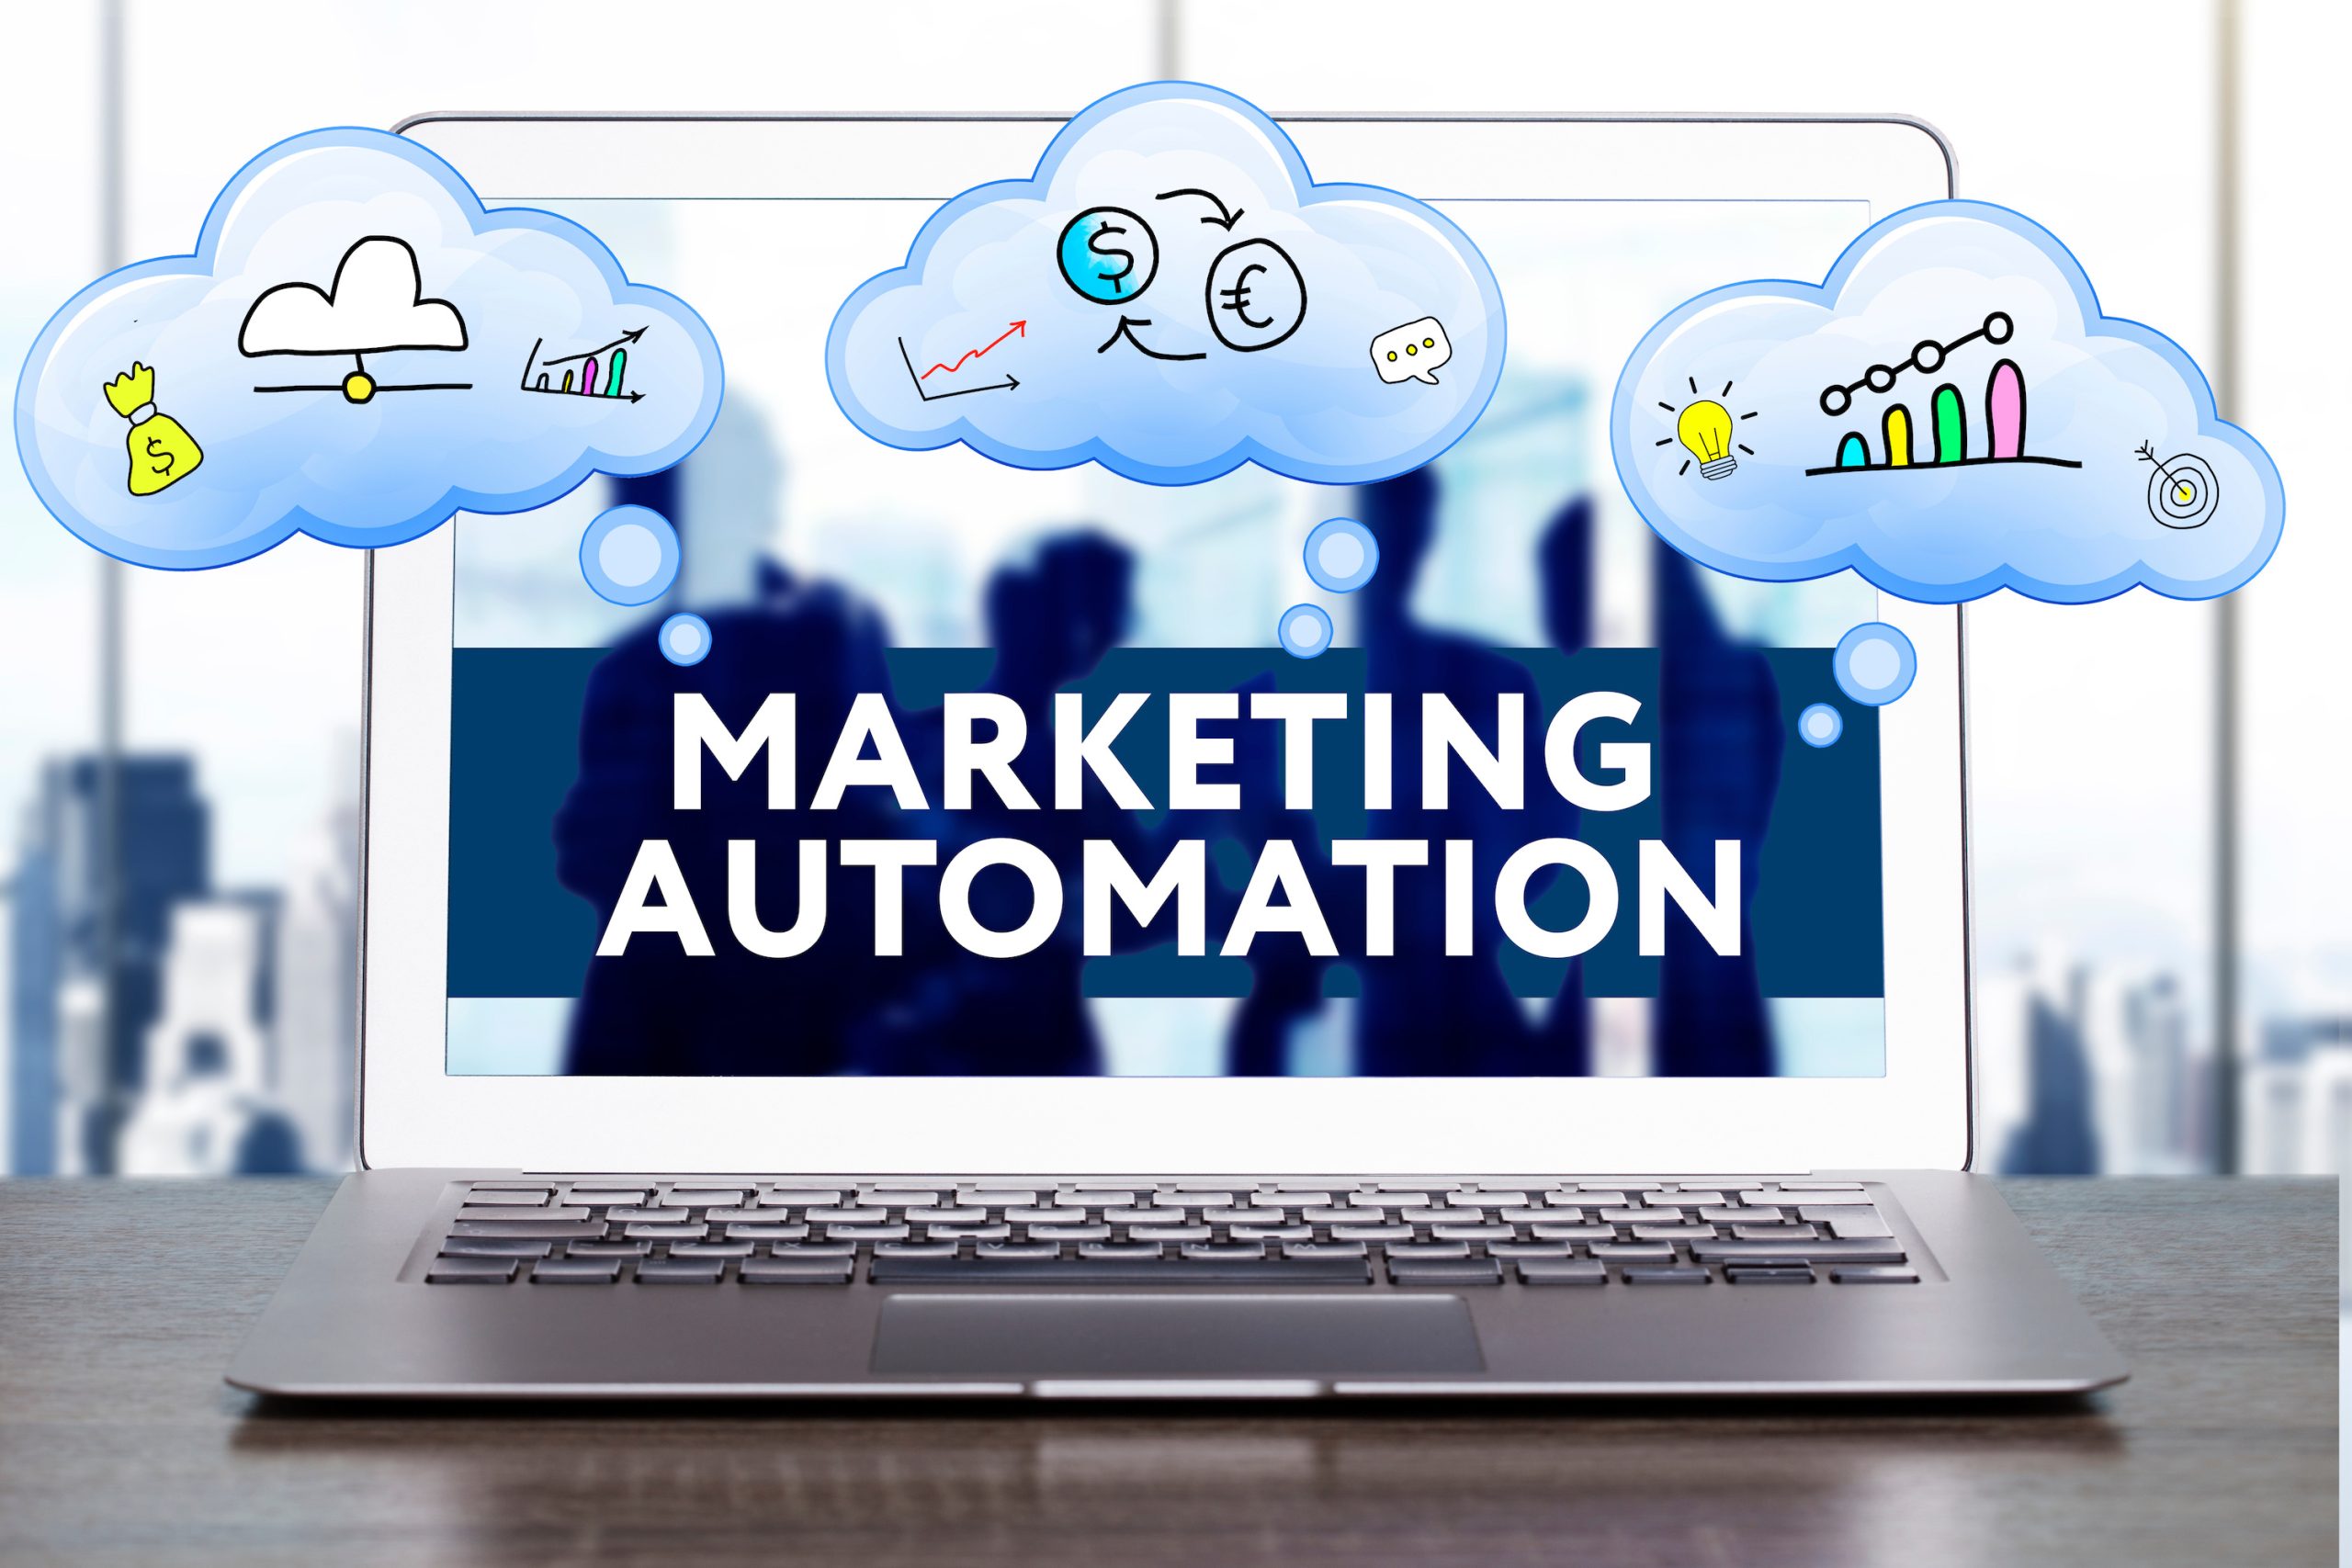 Why Marketing Automation is Important for Businesses